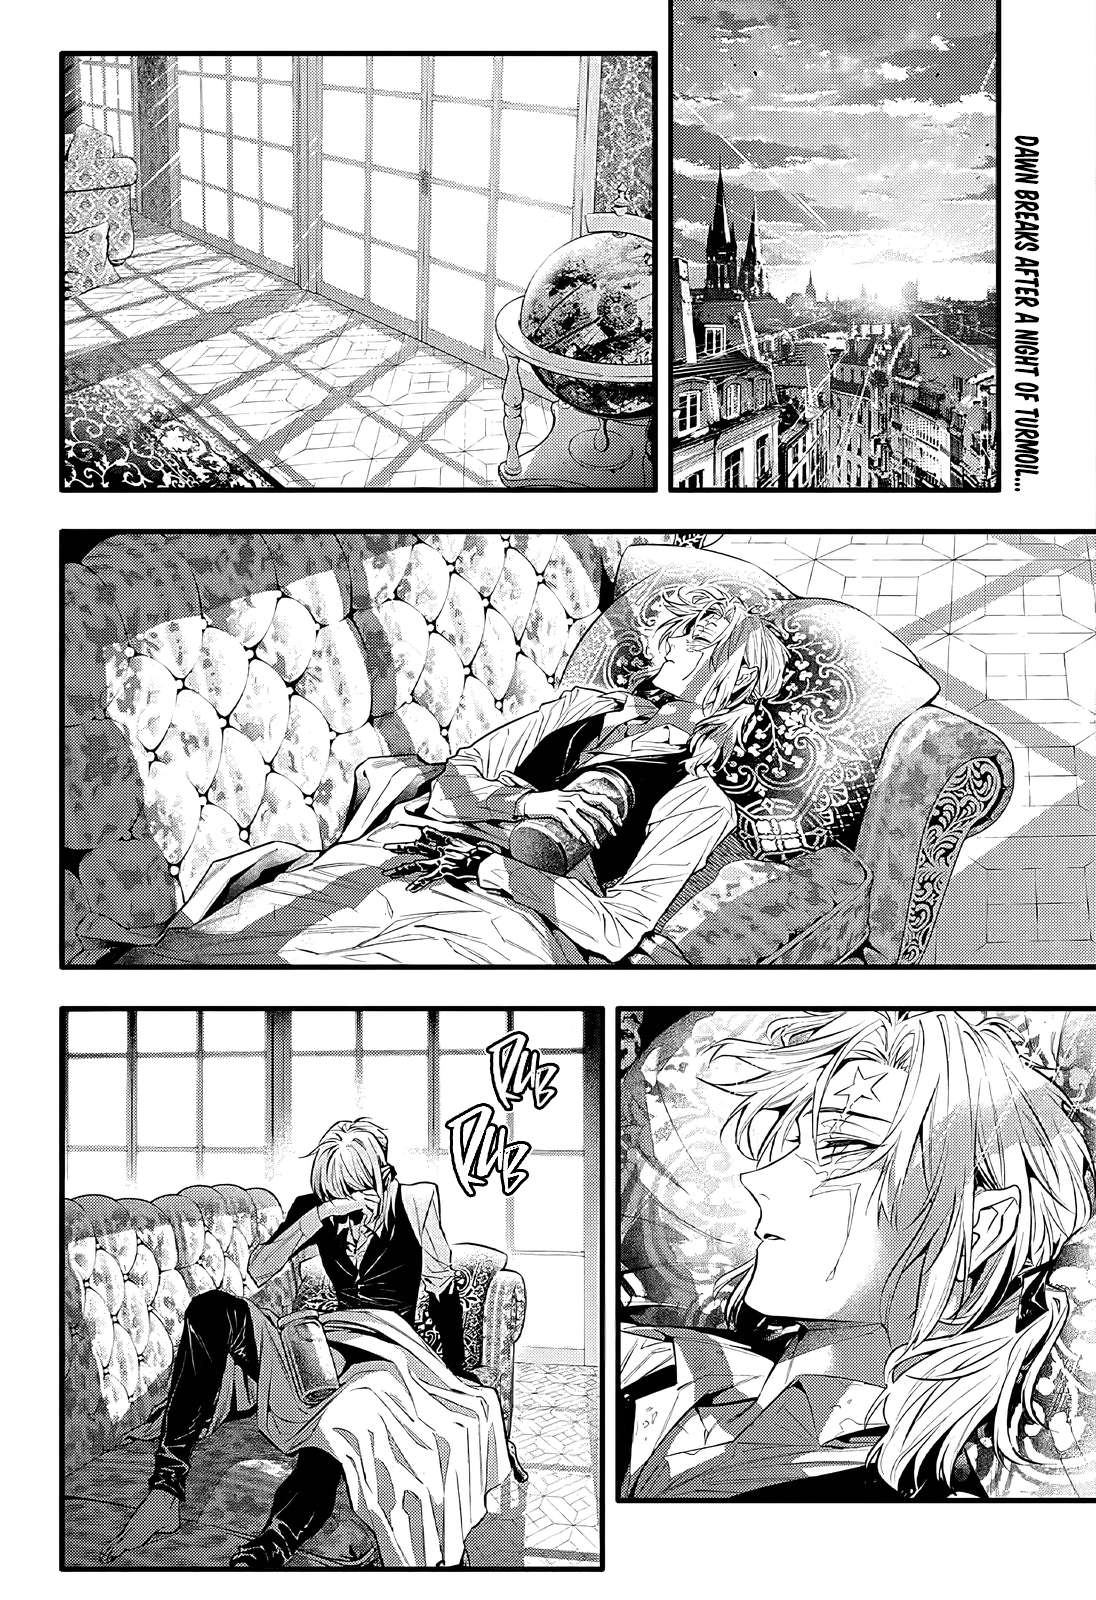 D.Gray-man chapter 248 page 4